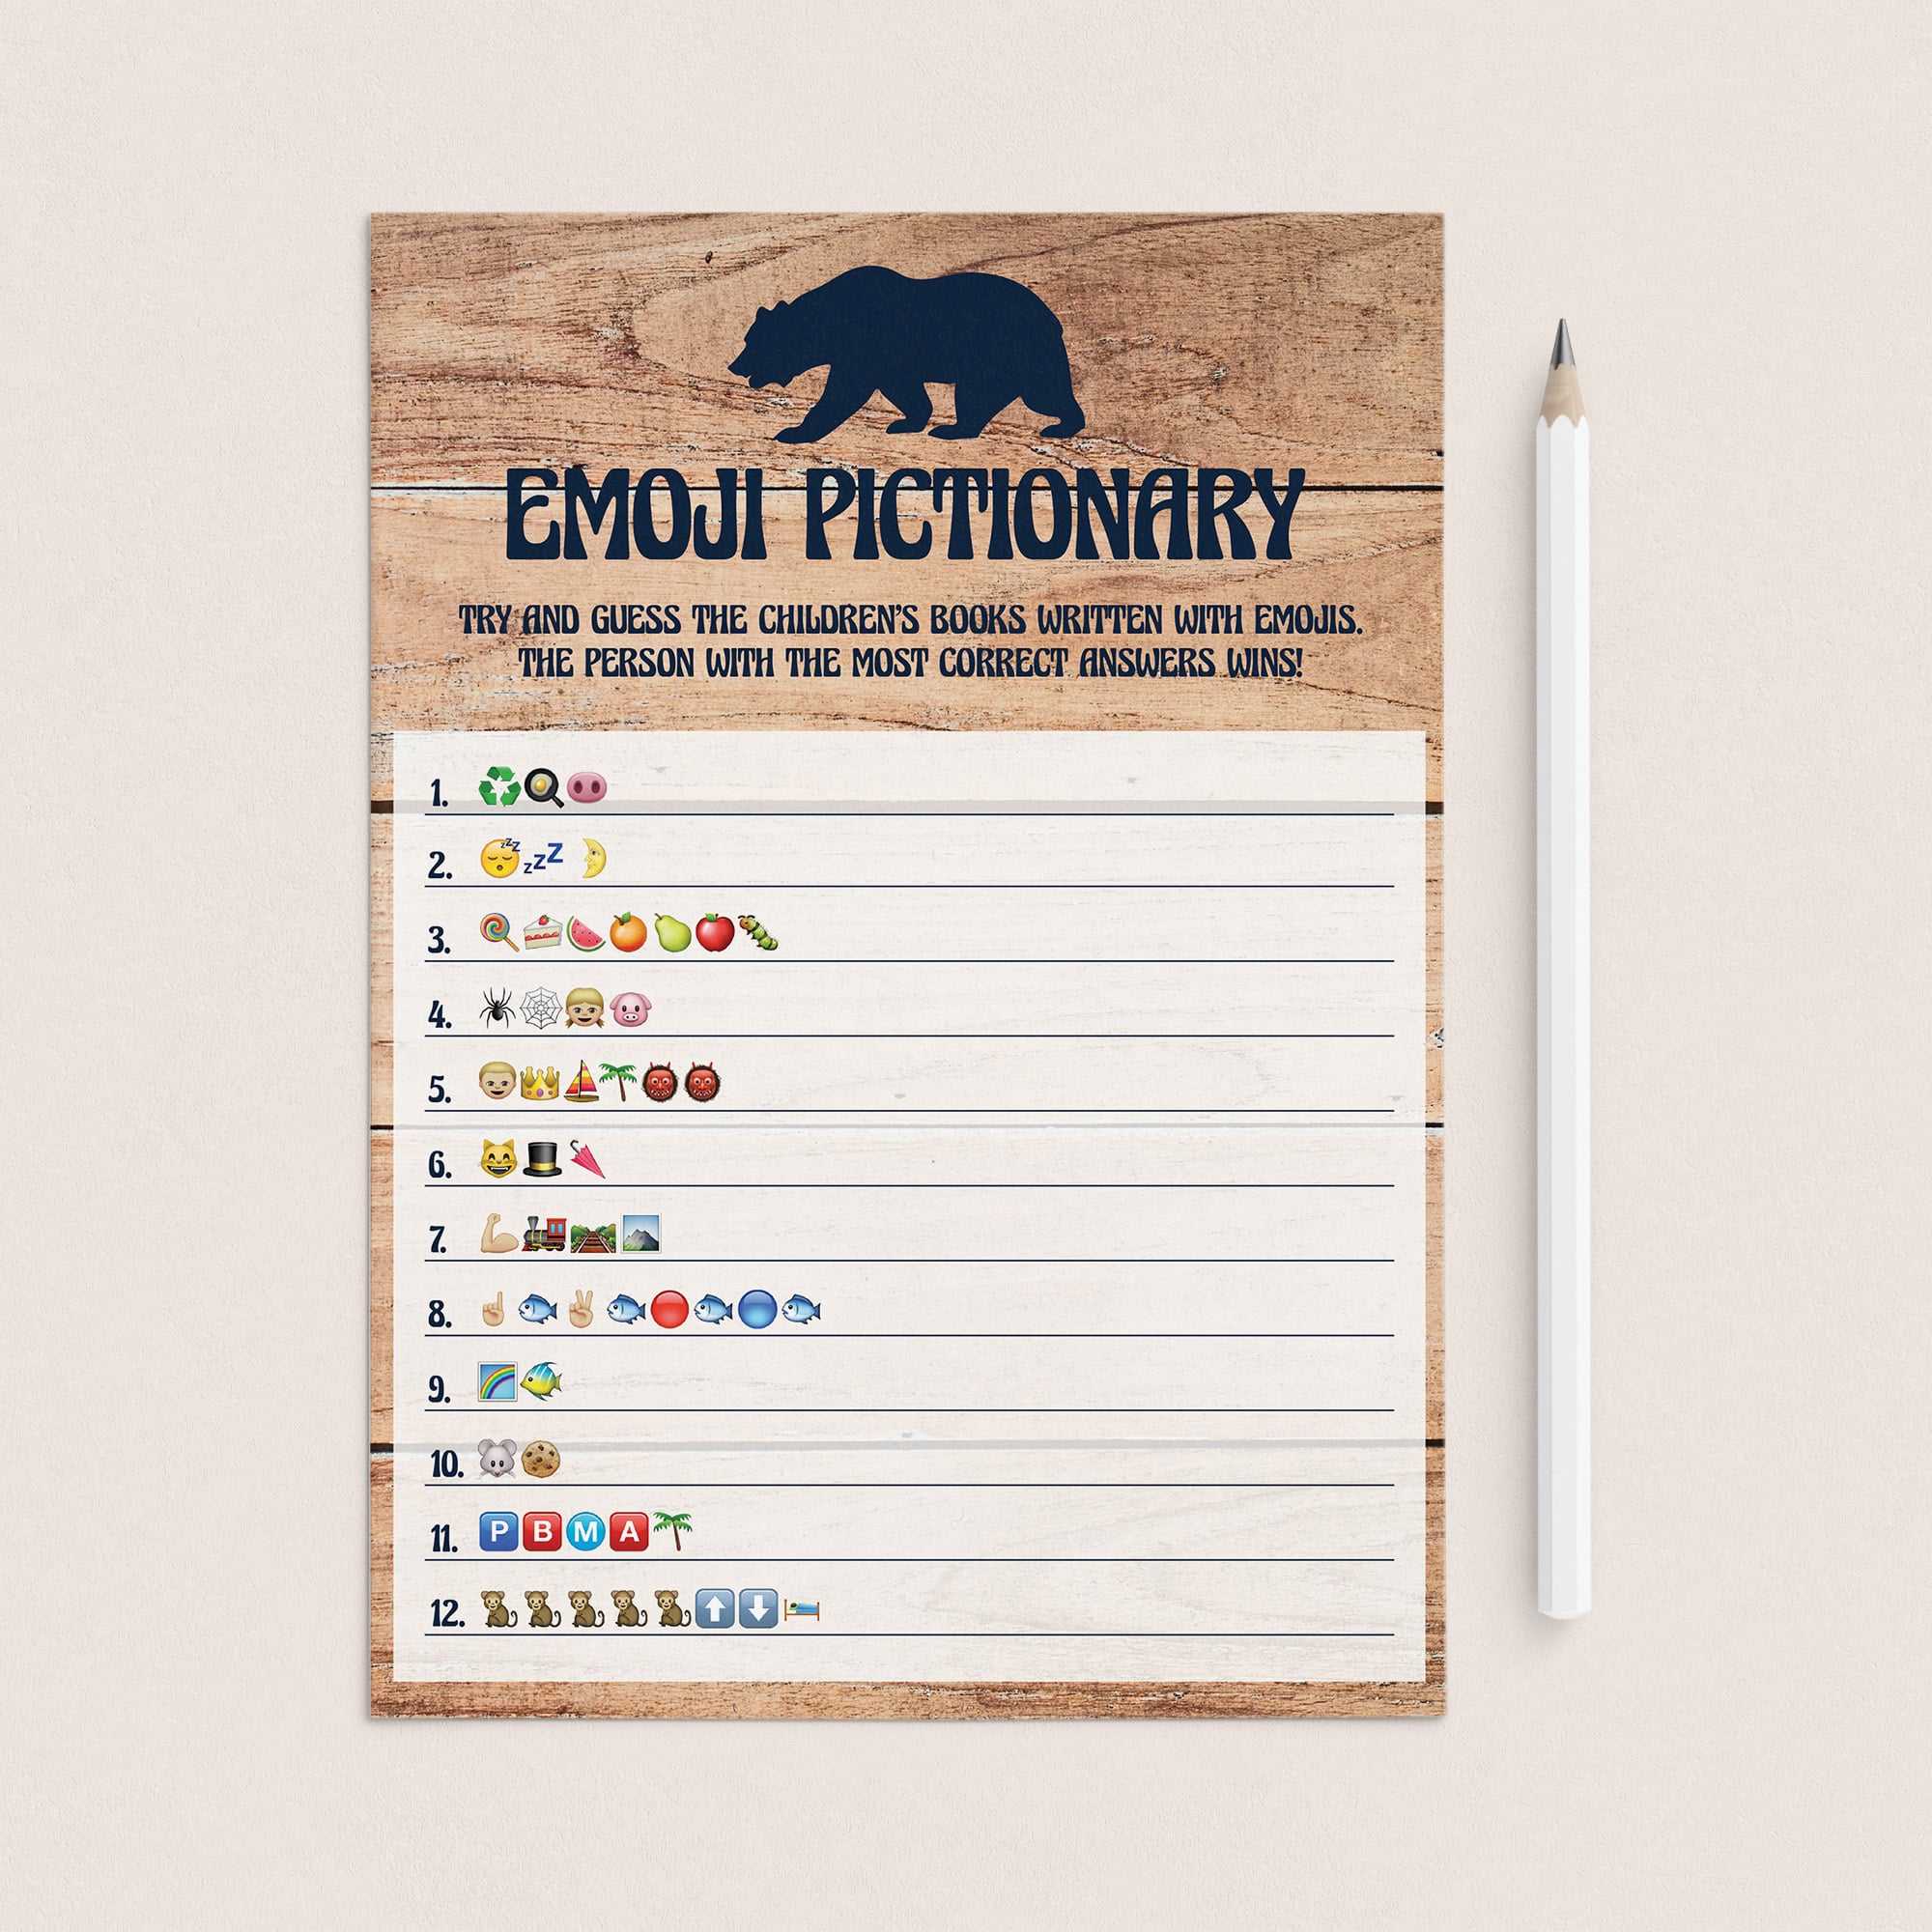 Printable emoji pictionary for woodland baby shower by LittleSizzle